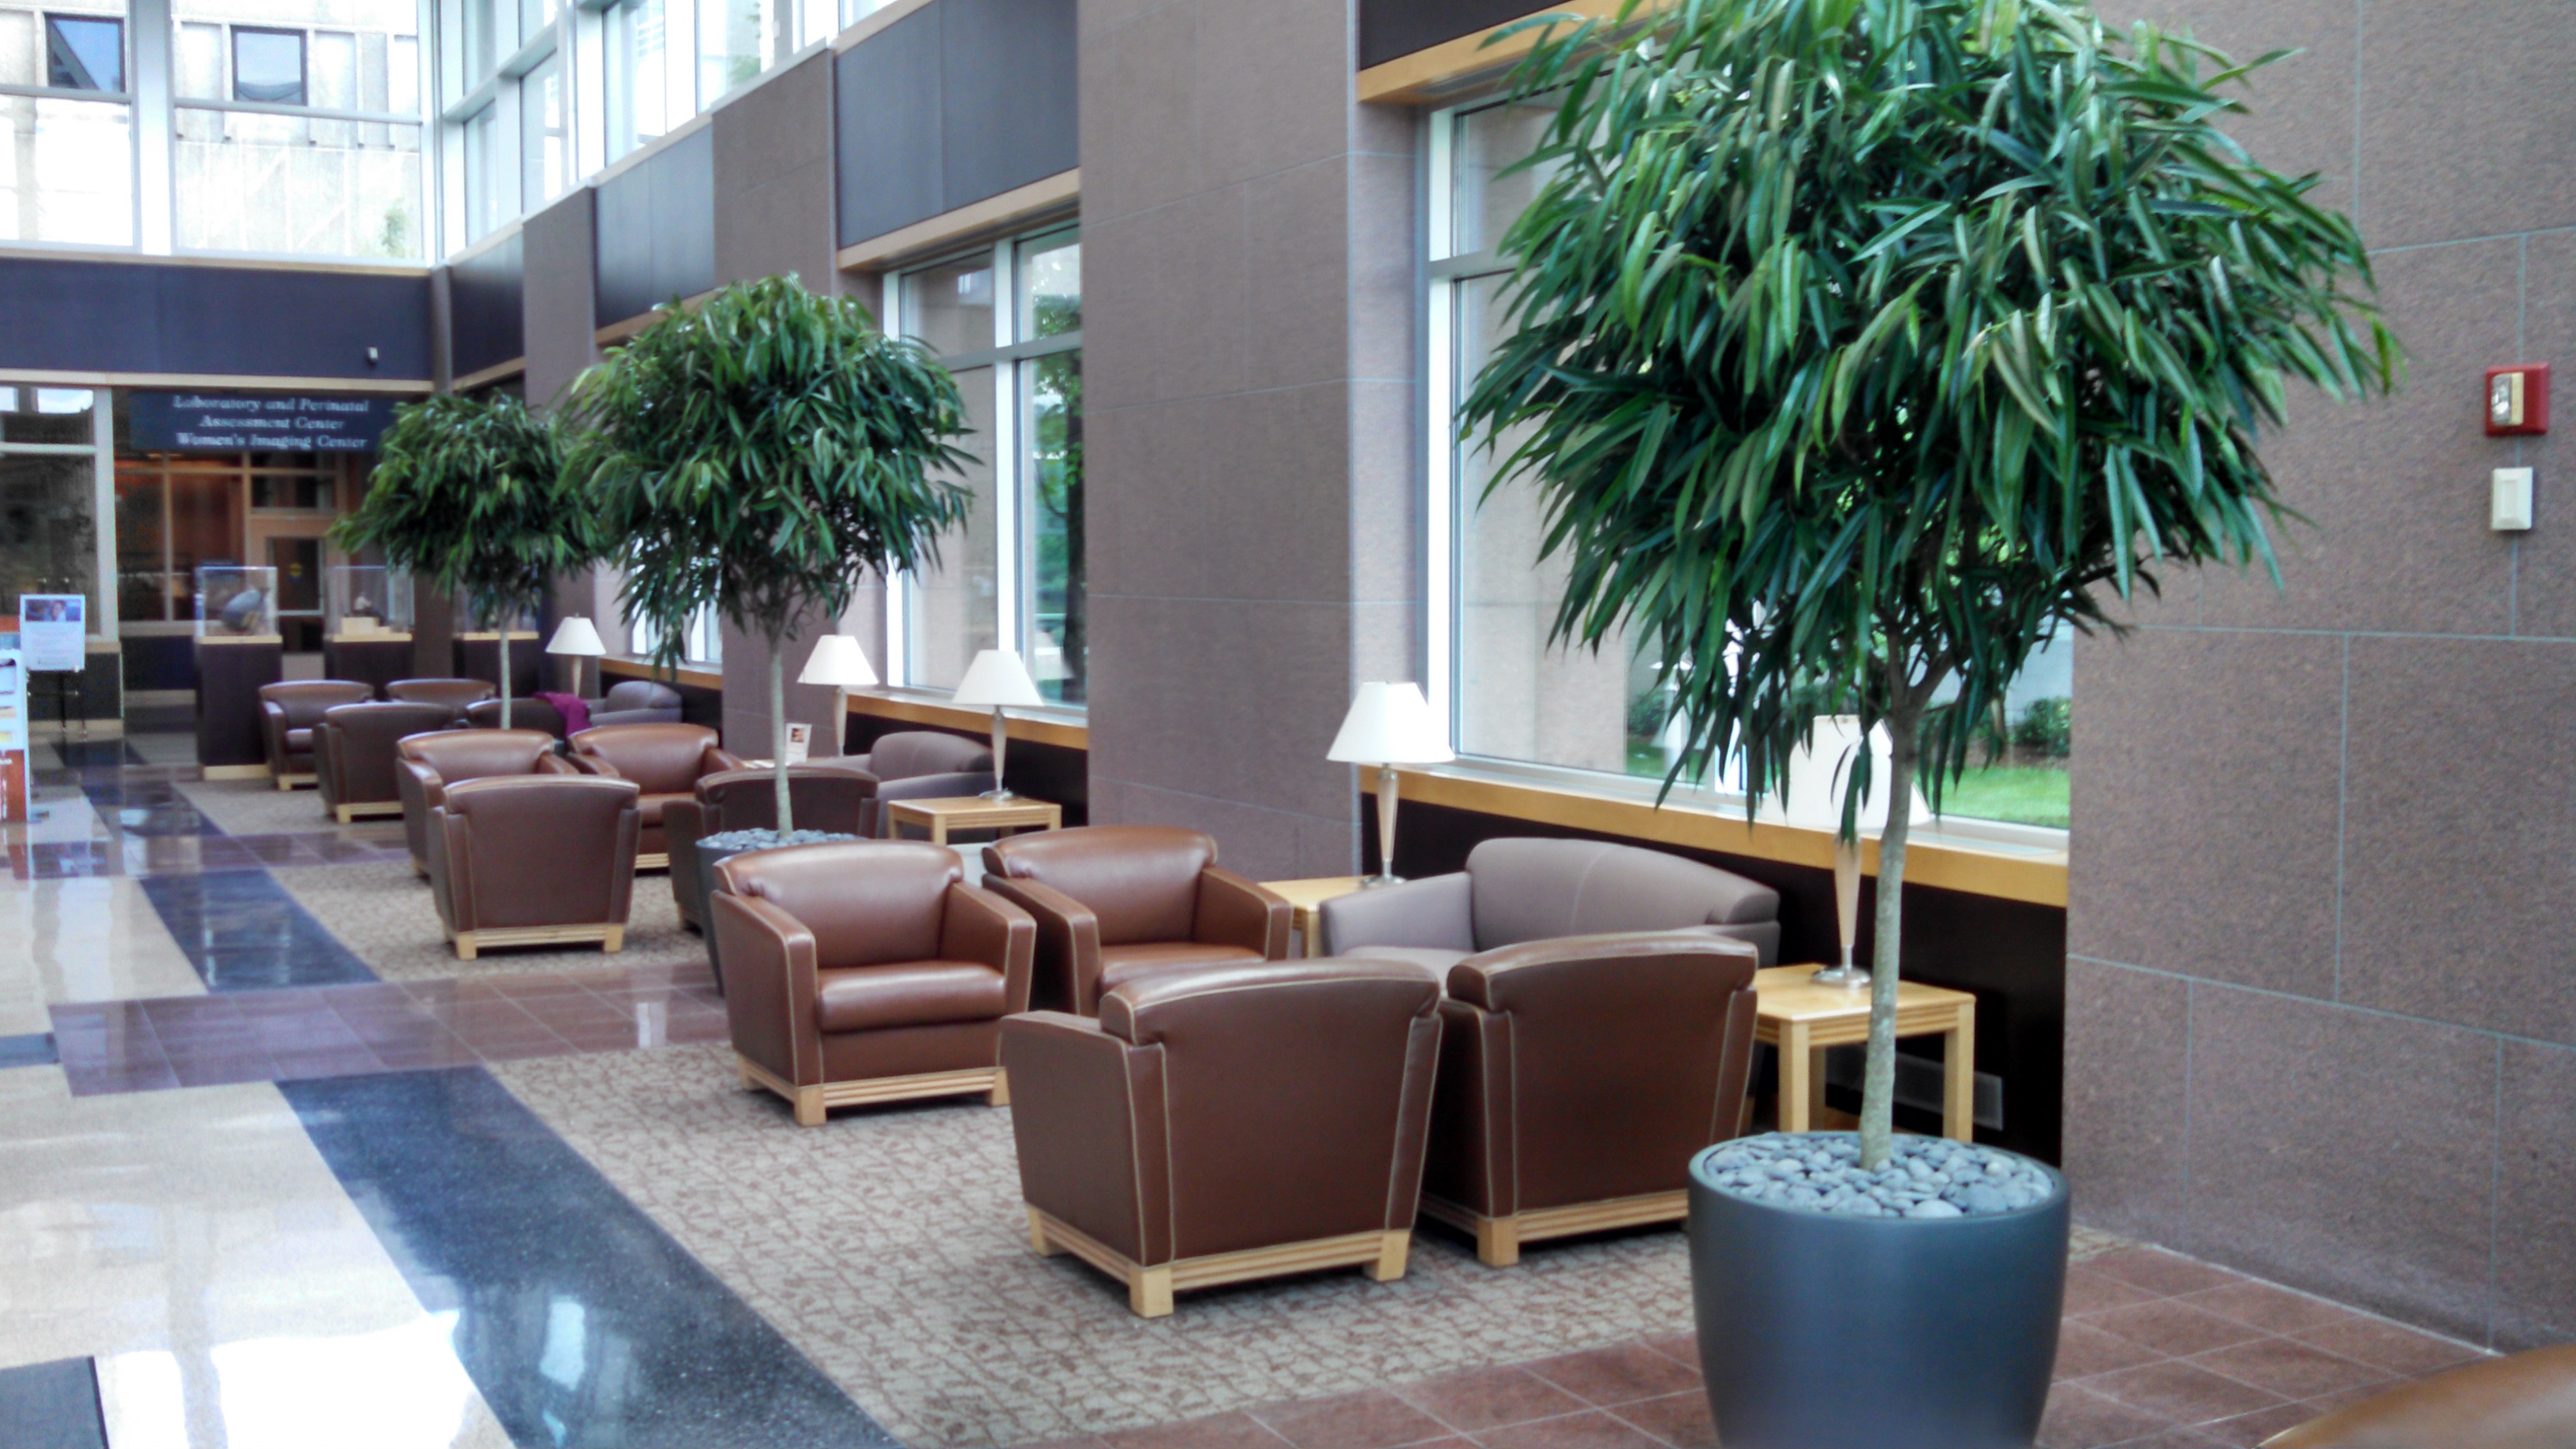 Ficus Alii at Wheaton Franciscan Healthcare, Wisconsin